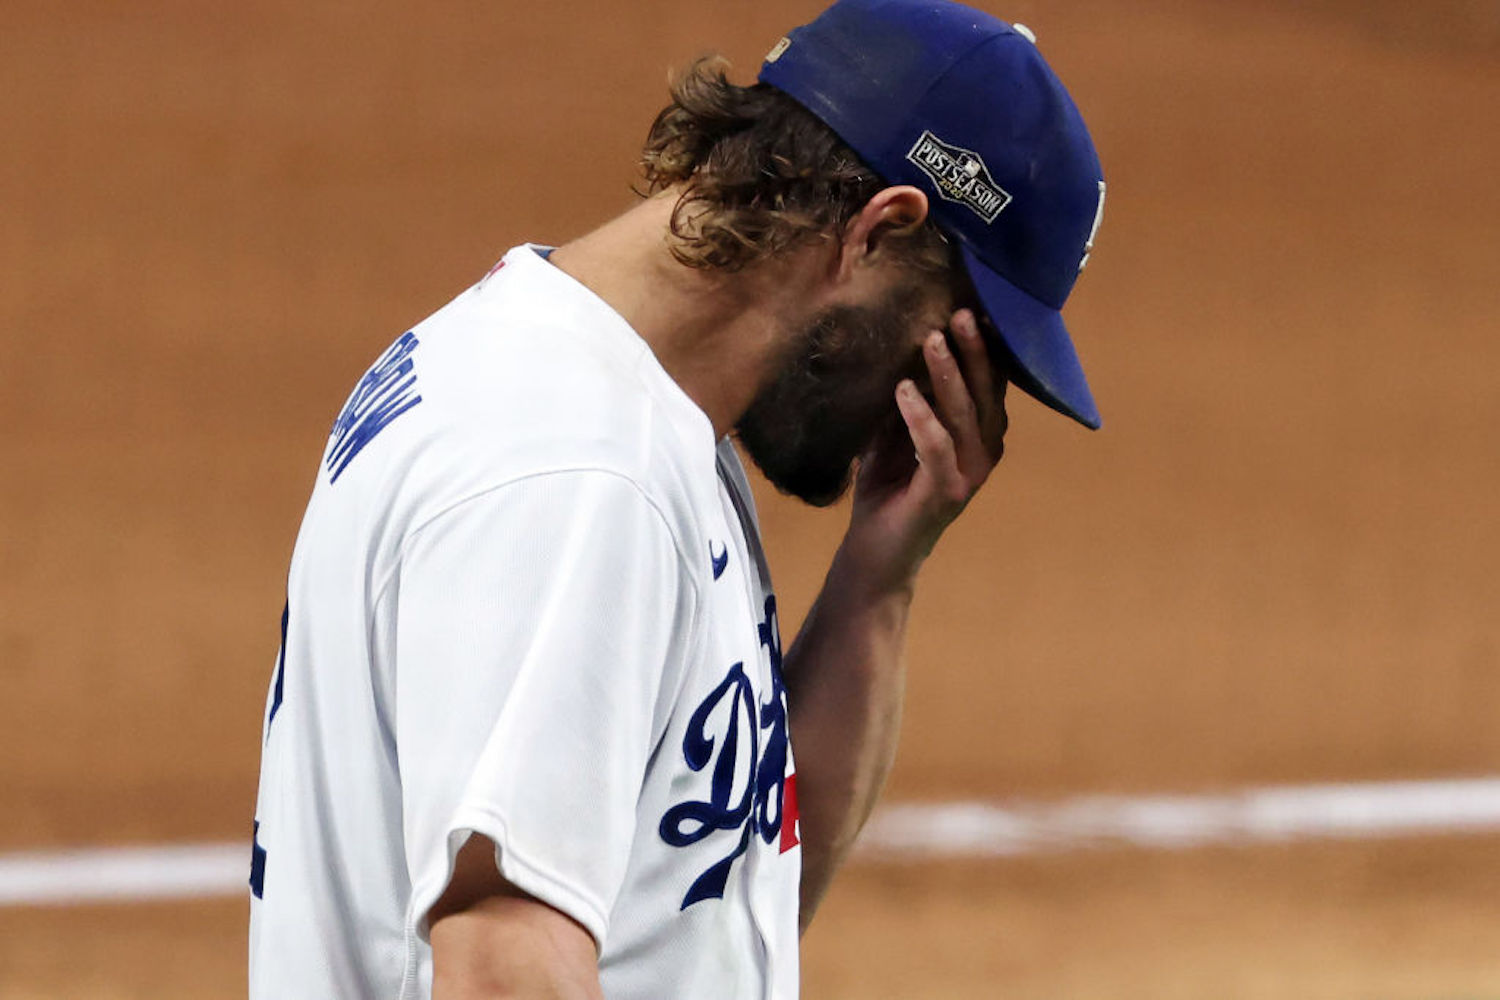 How Many Times Has Clayton Kershaw Choked in the Playoffs?